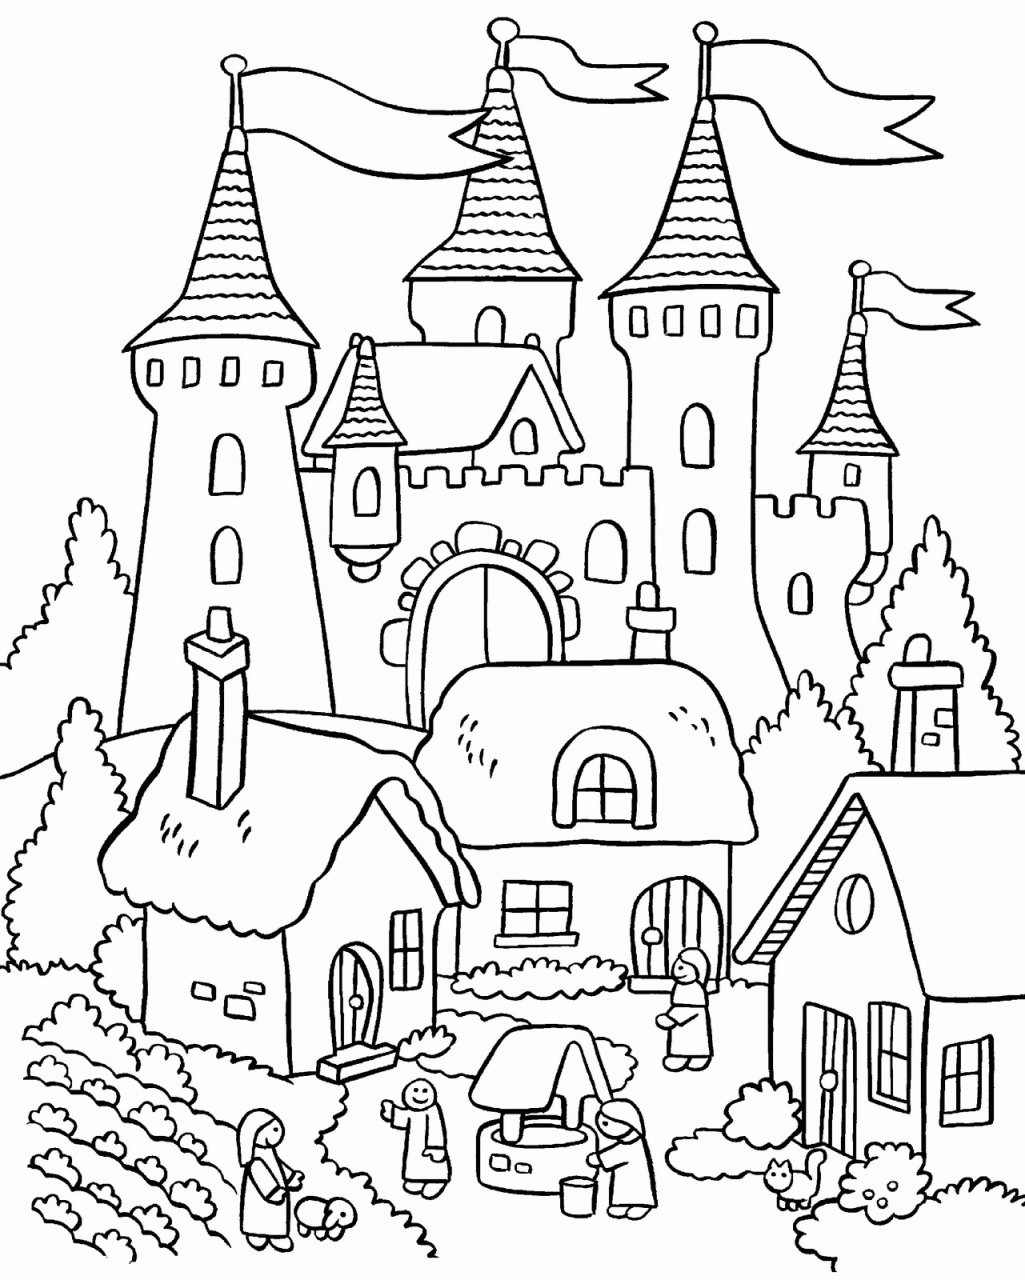 Coloring Pages Of Gardens - Coloring Page